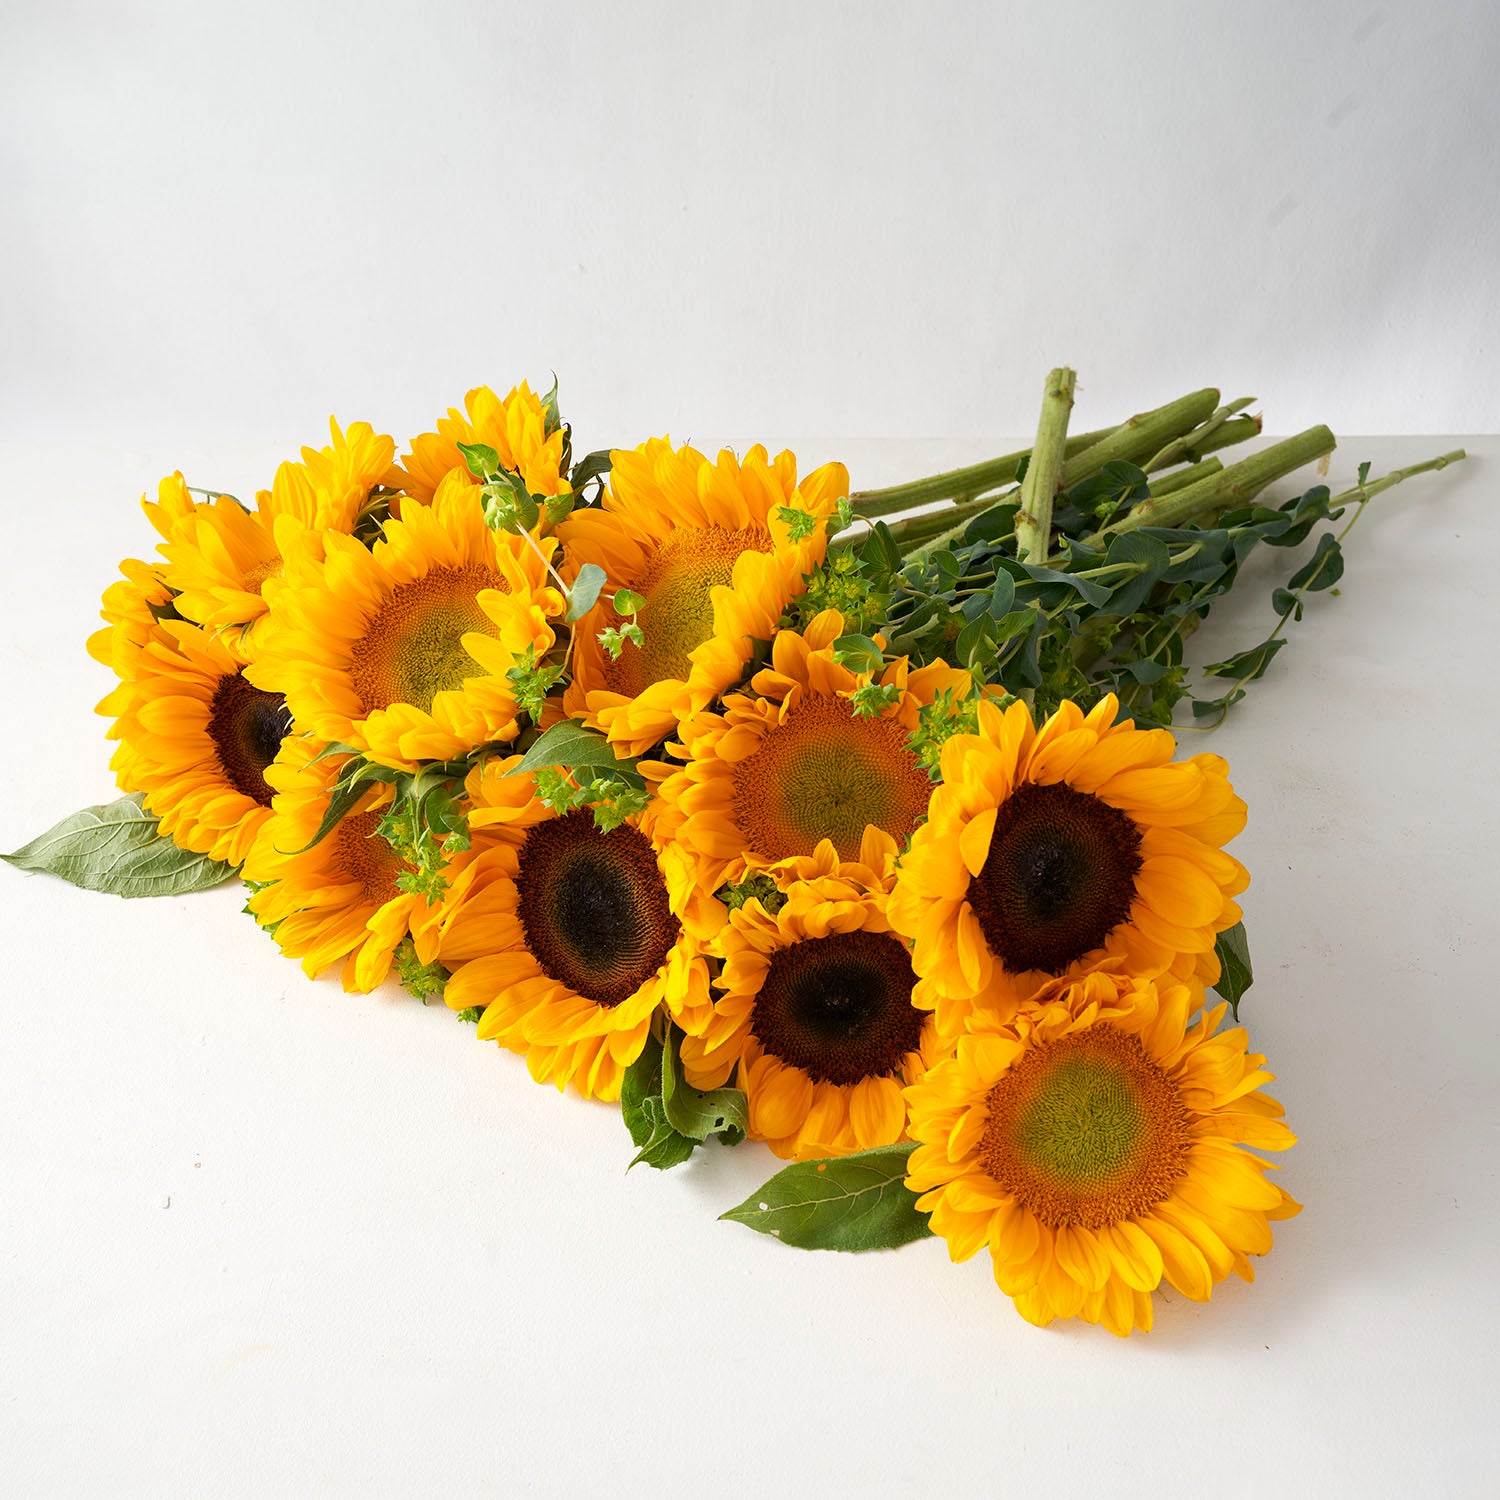 Large bouquet of sunflowers laid out on white background.